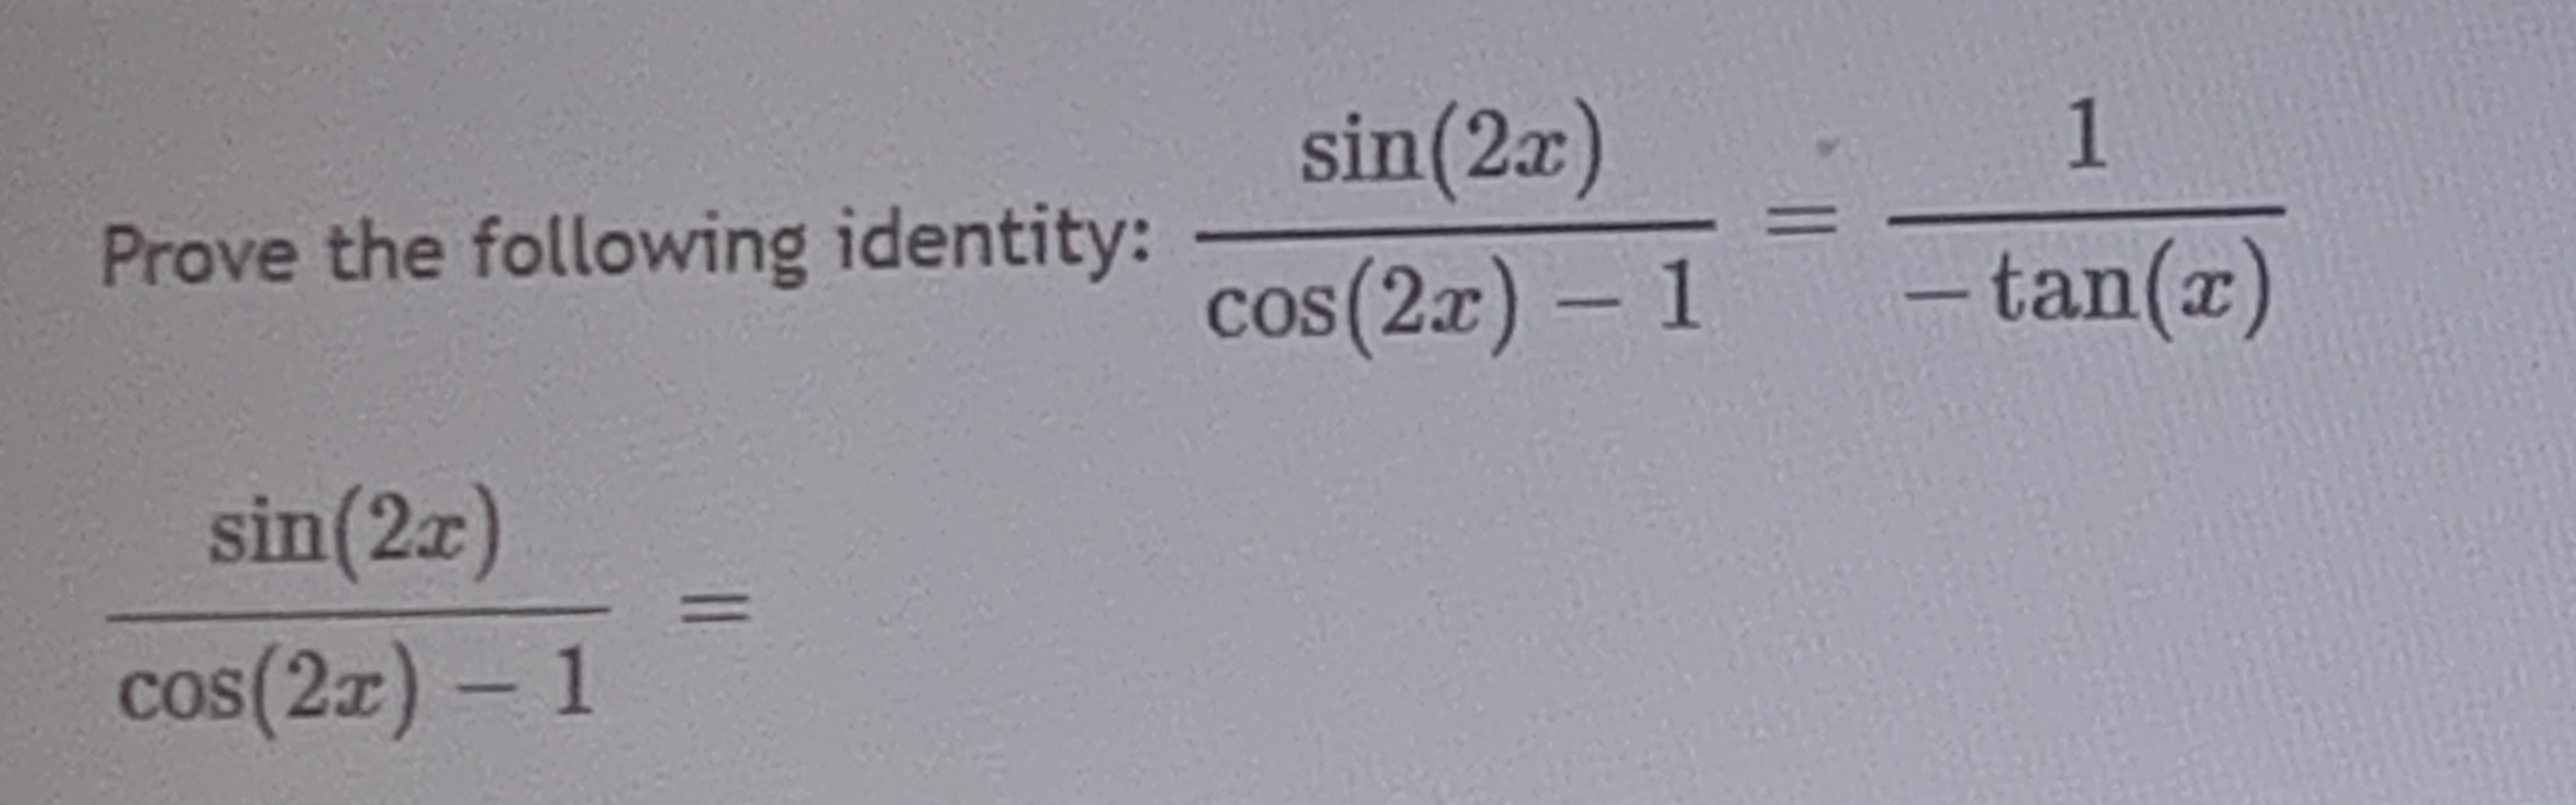 Answered Sin 2x 1 Prove The Following Identity Bartleby